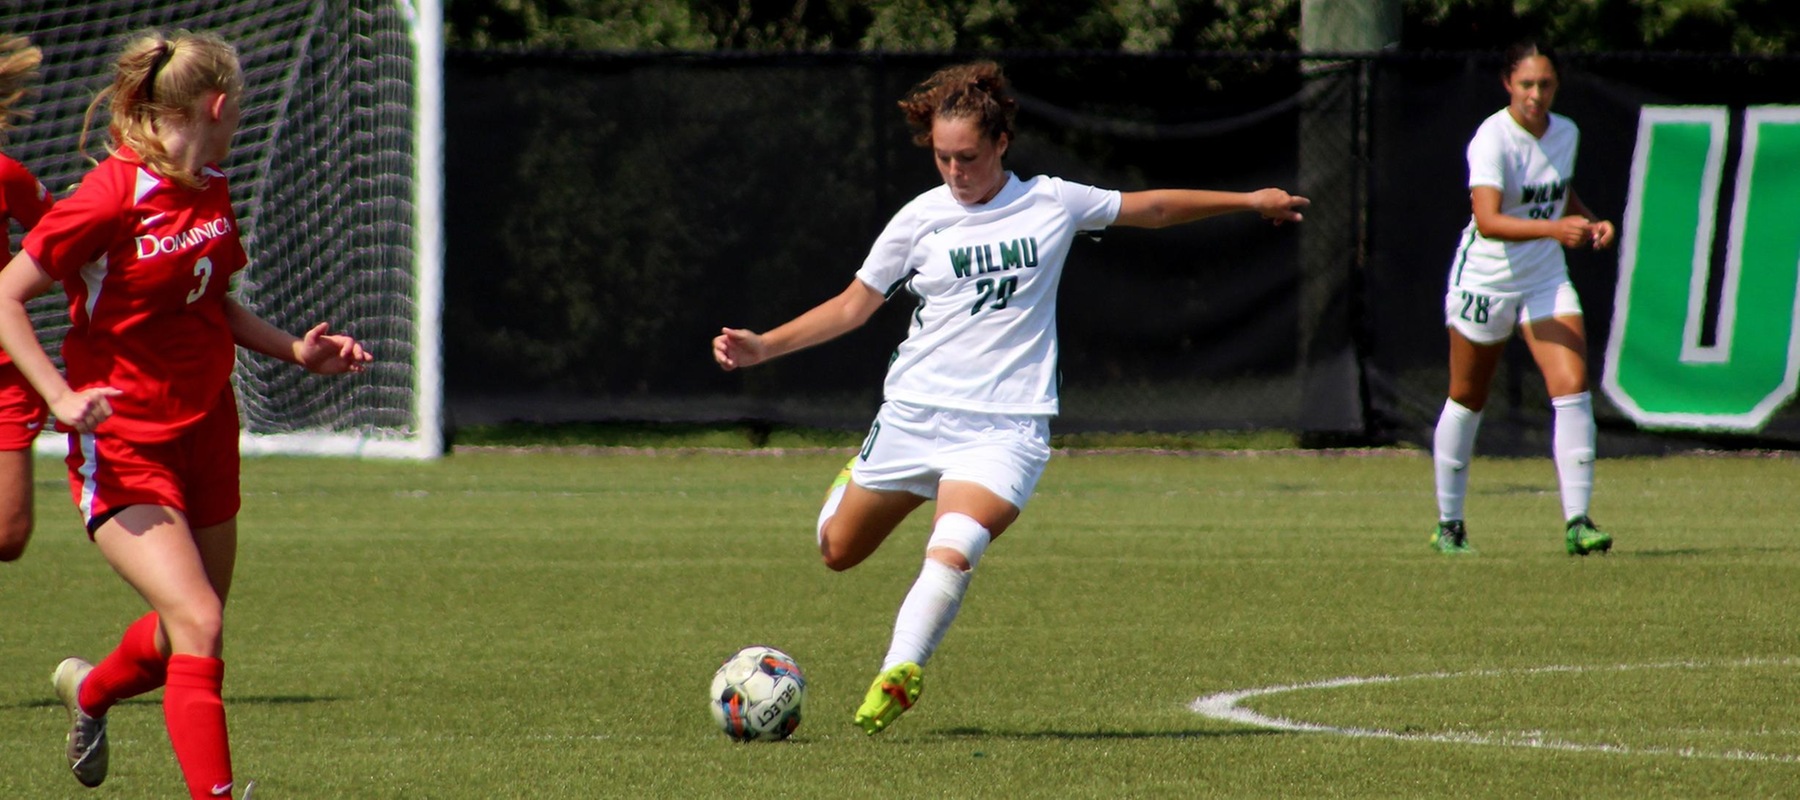 File photo of Samantha Emmi who scored her 5th goal of the year at Bridgeport. Wilmington University’s Samantha Emmi (20) kicks the ball away from Dominican University during their NCAA women's soccer match at the Wilmington University sports complex in Newark, Delaware, September 21, 2022. Photo by Alexa Coney